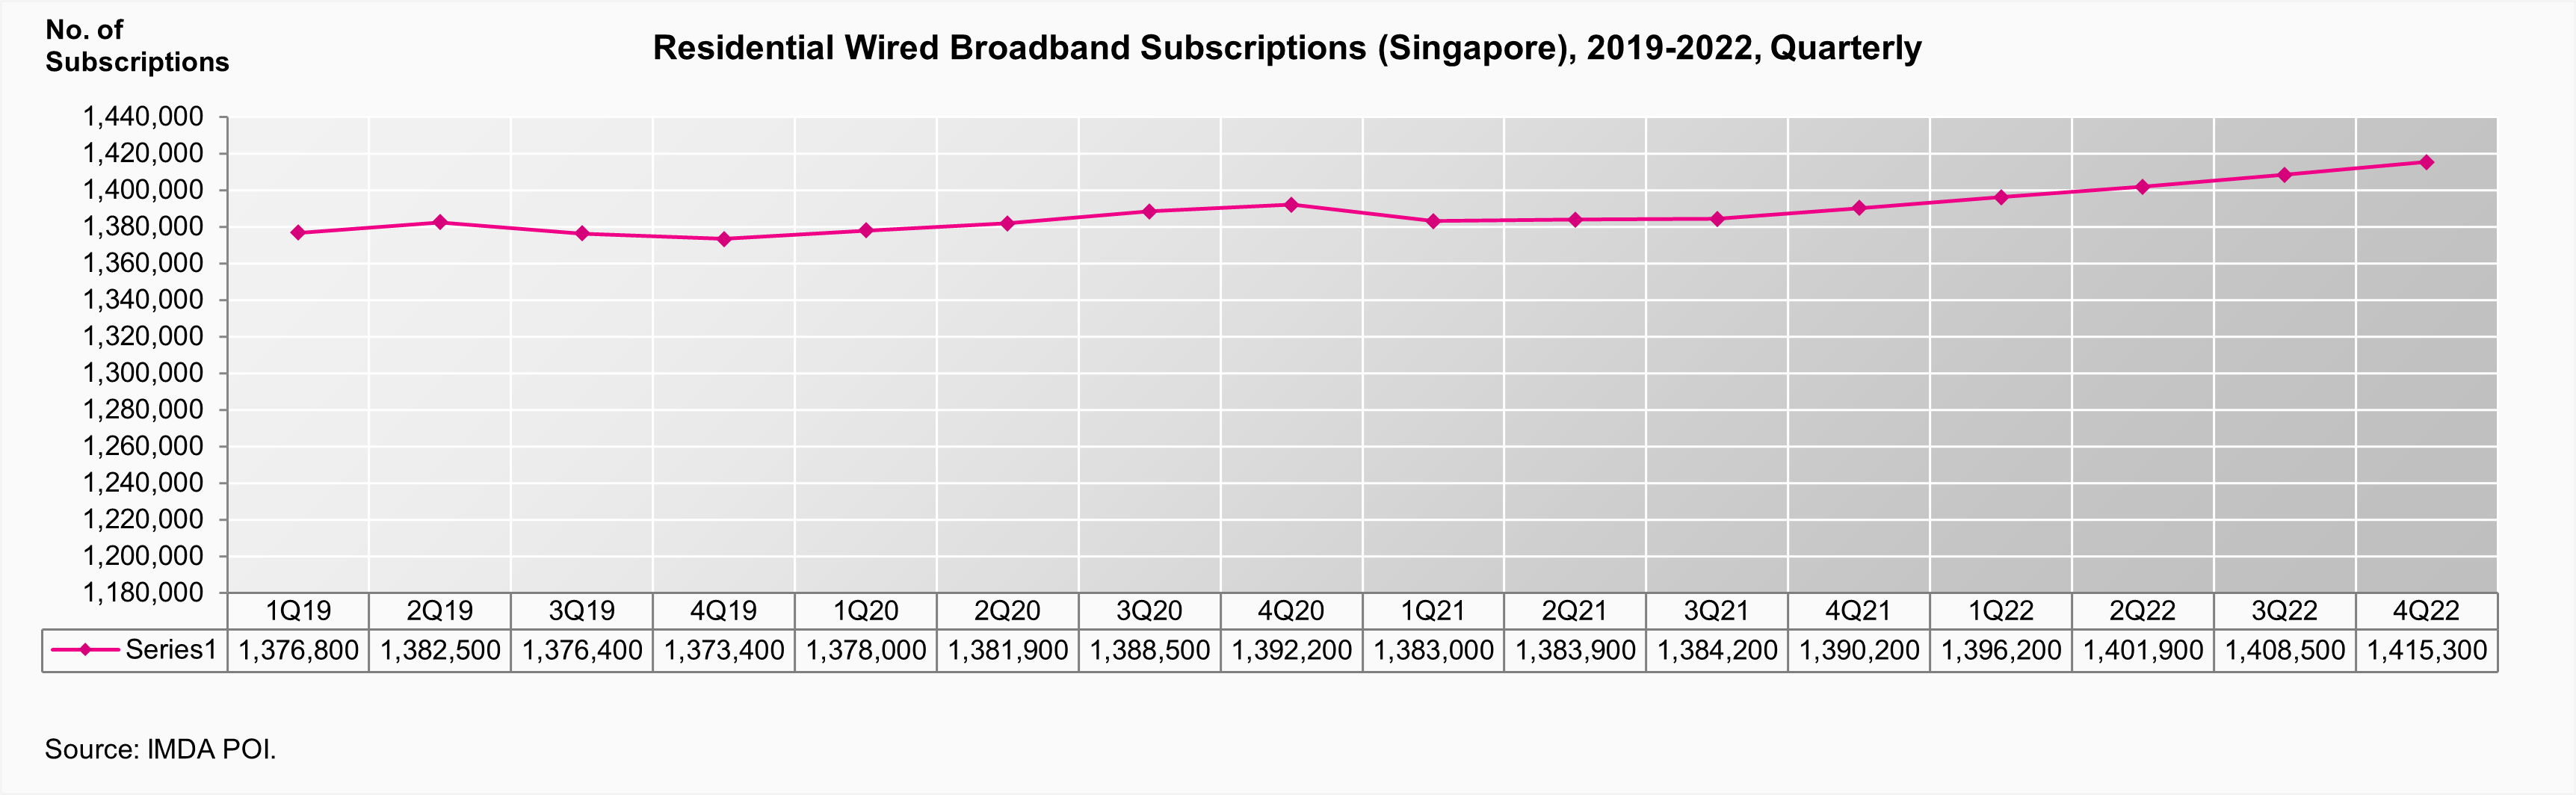 A Statistical Chart on Residential Wired Broadband Subscriptions (Singapore) 2019-2022, Quarterly by IMDA POI